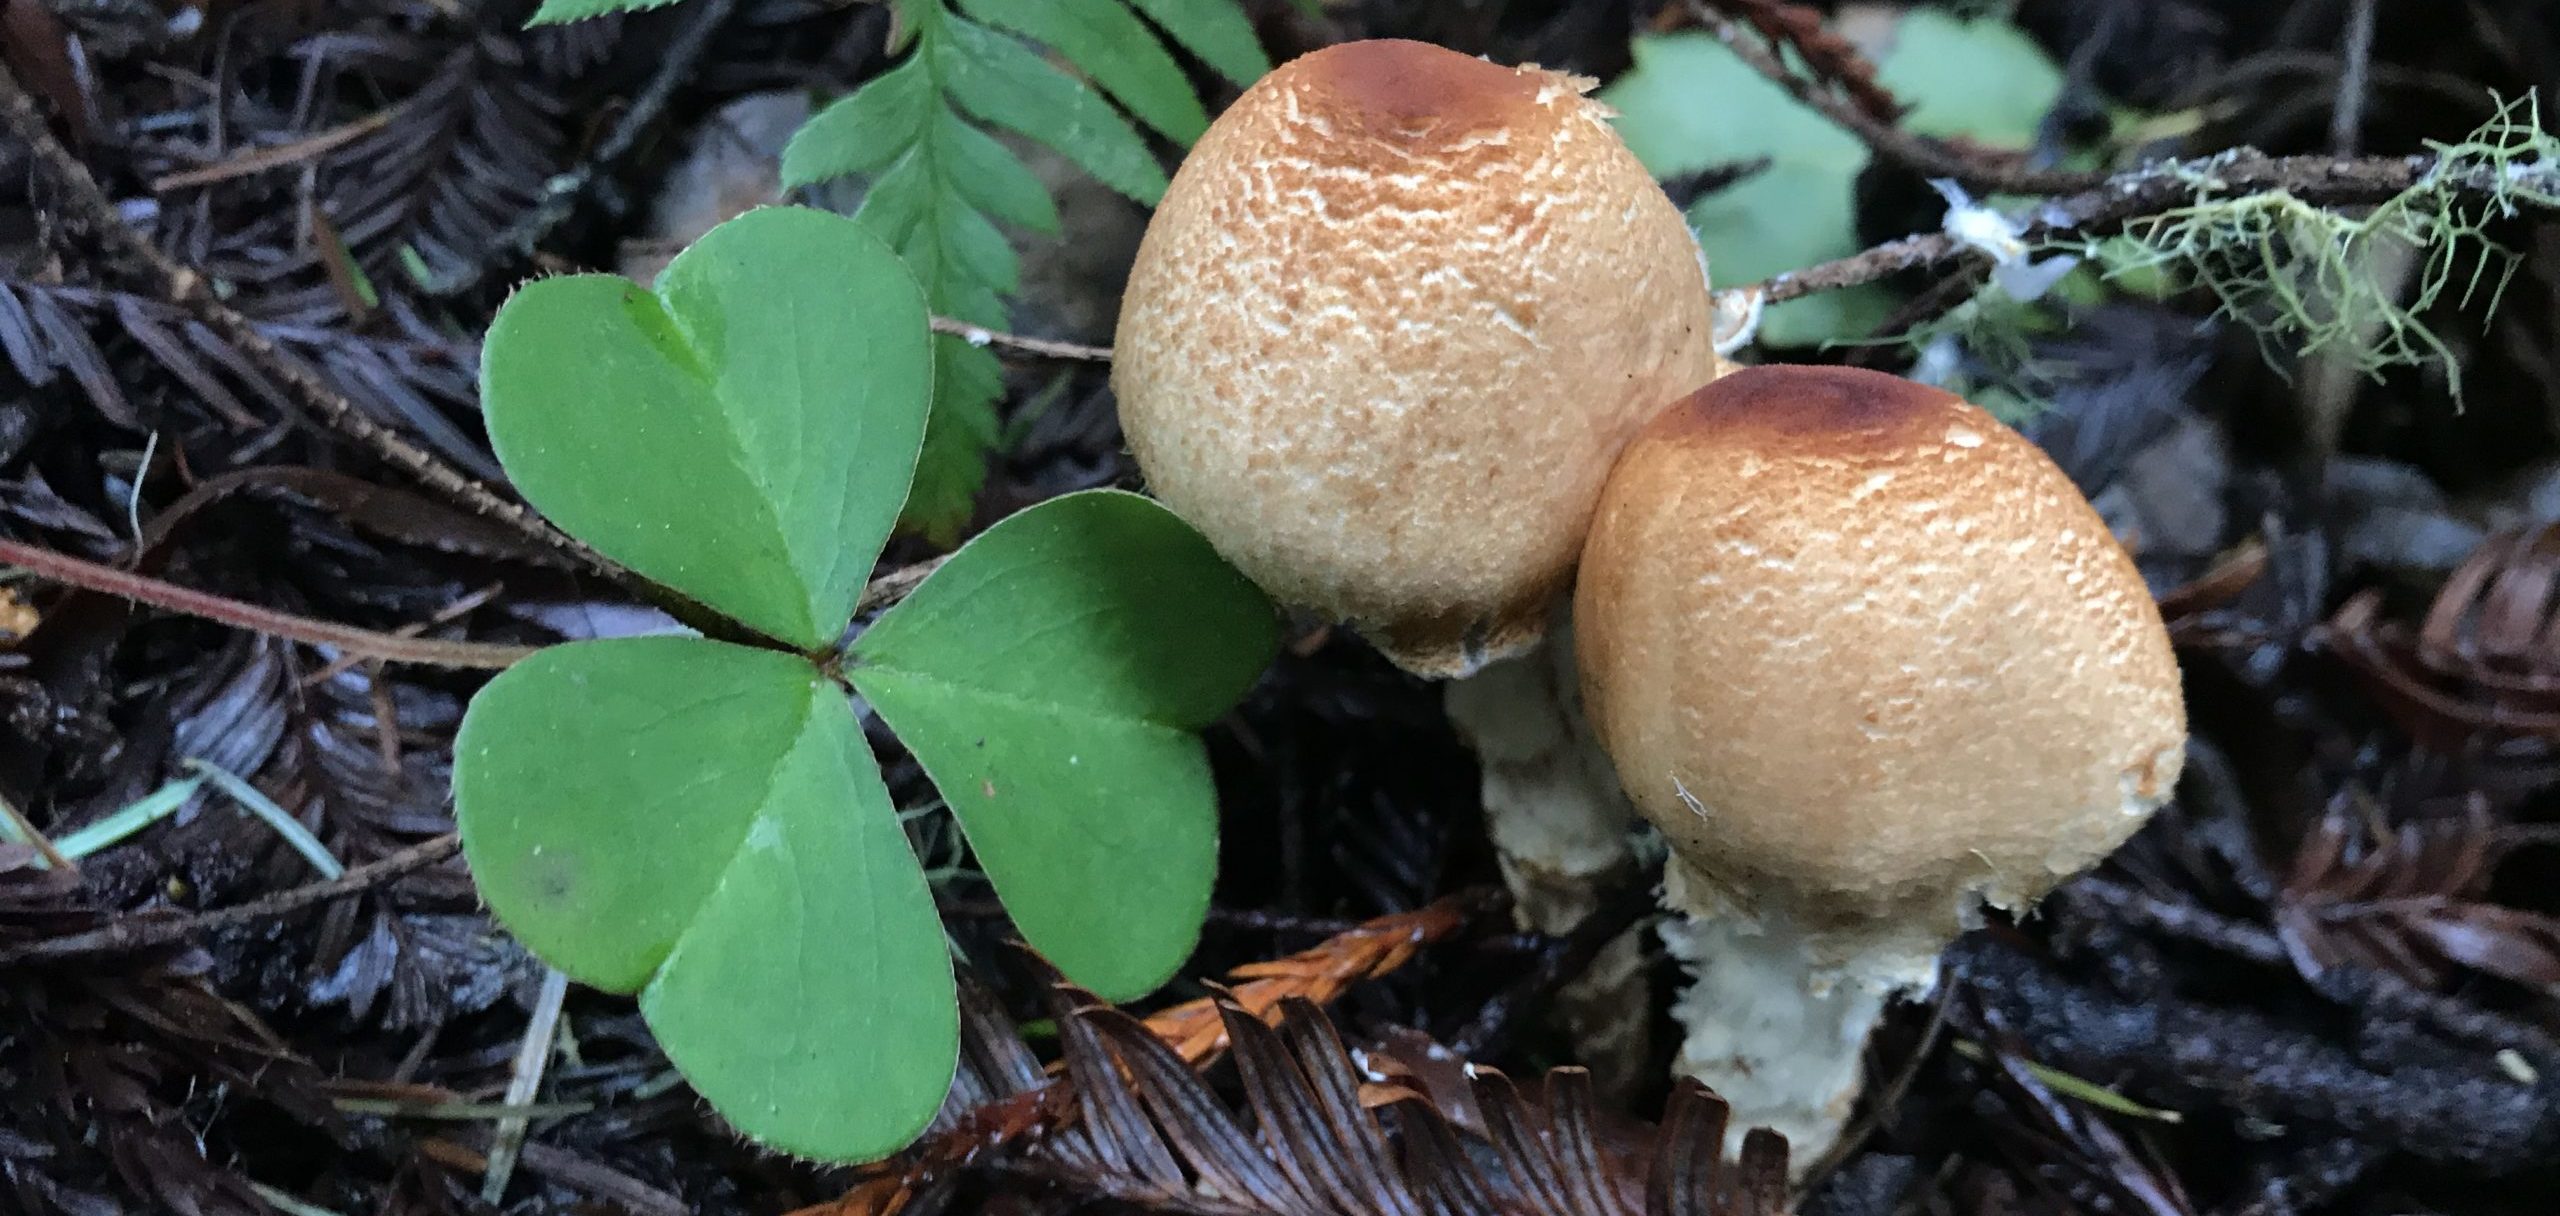 Two mushrooms with speckled brown patterns over white caps sprout up next to redwood sorrel.